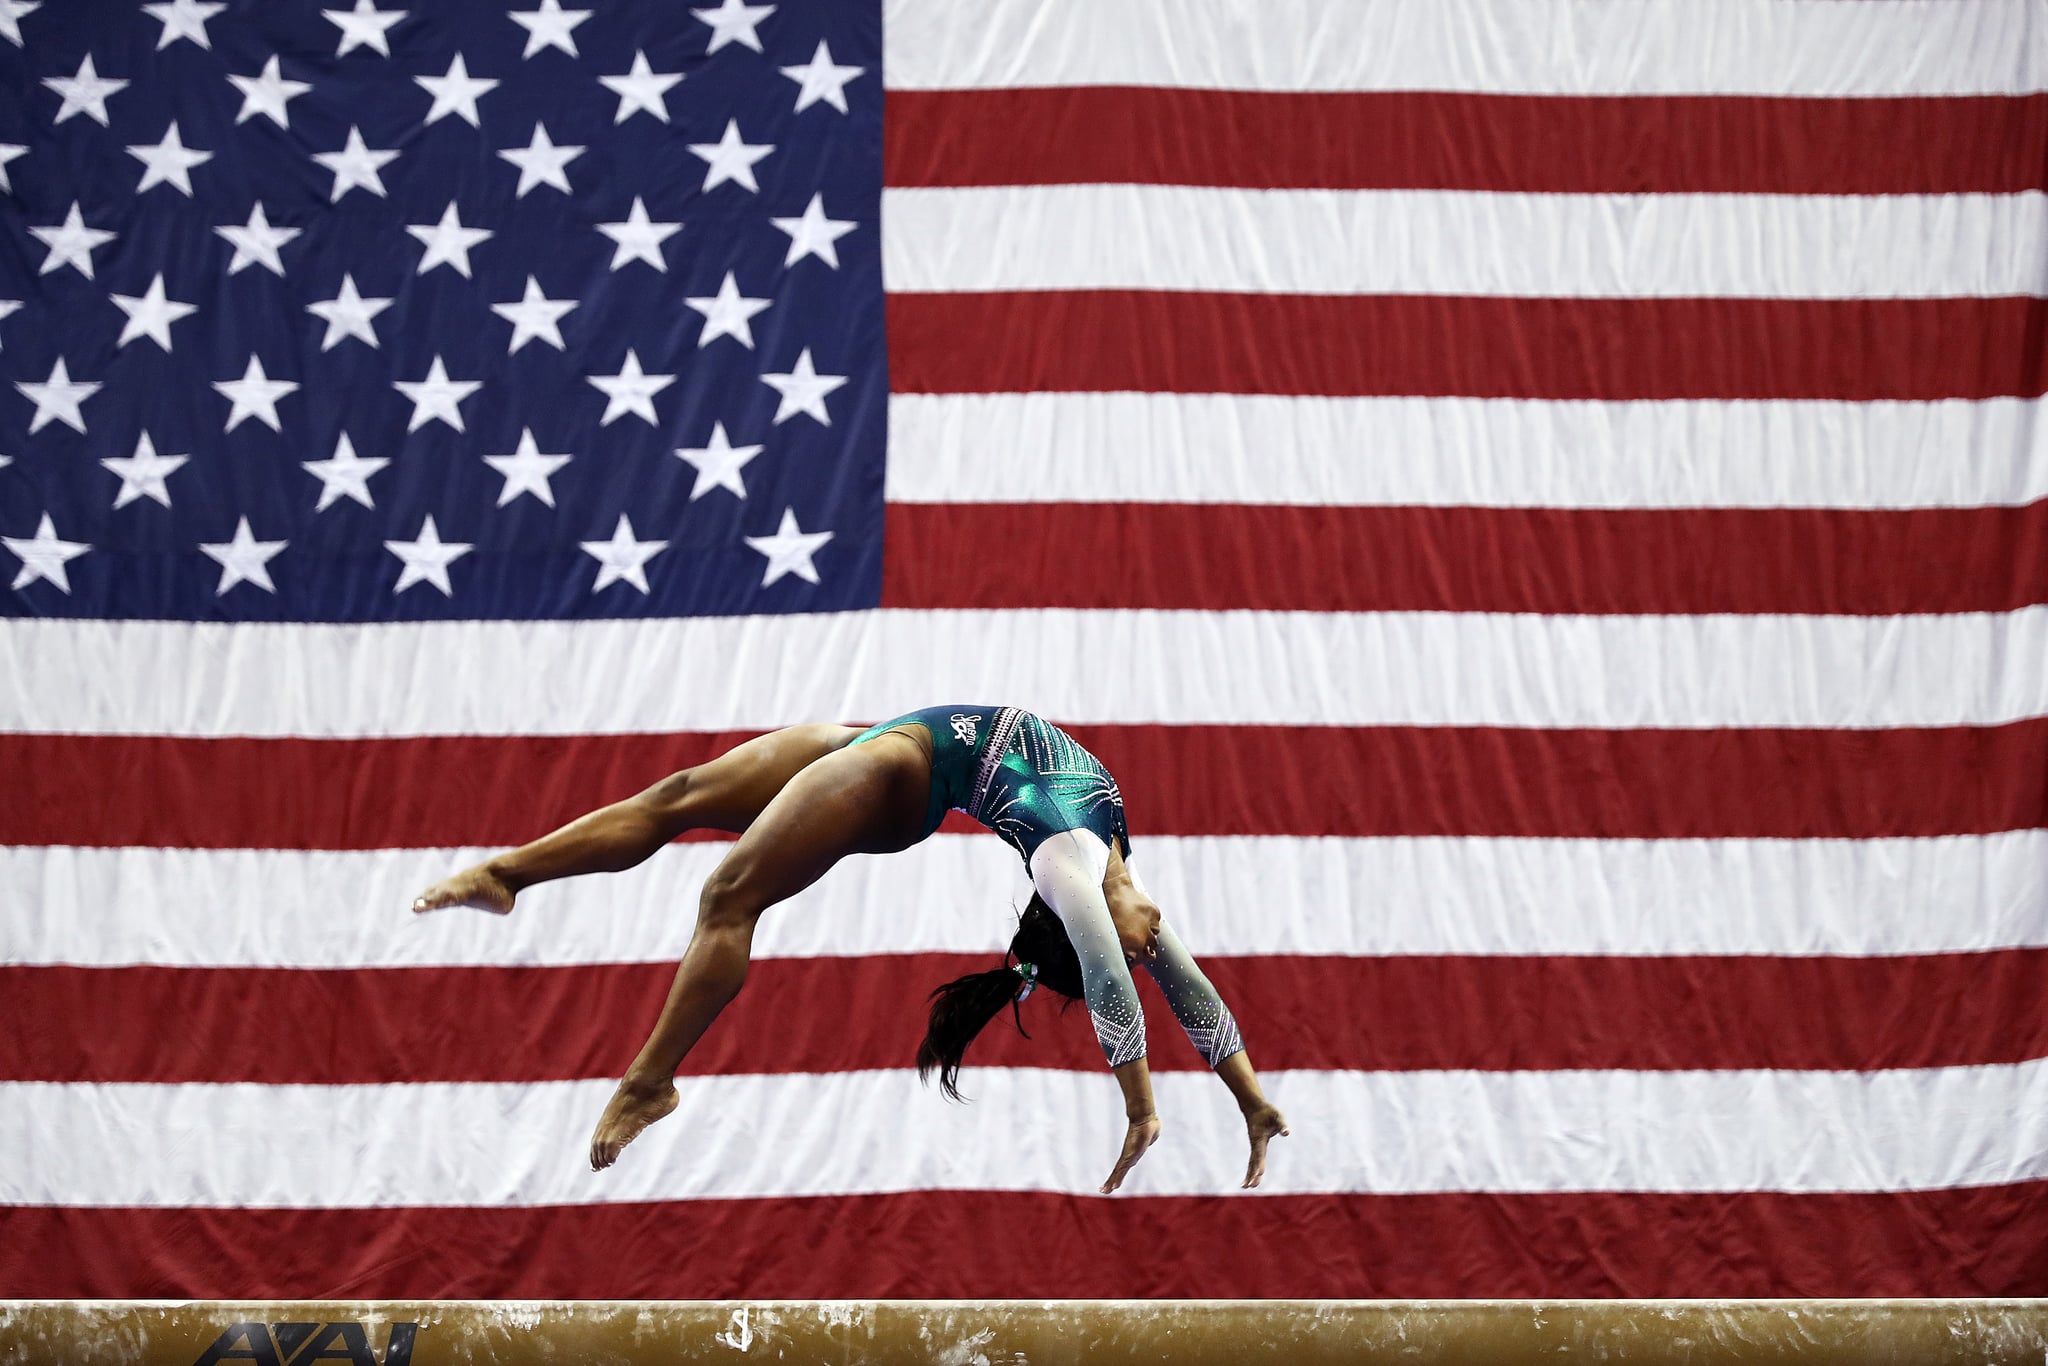 KANSAS CITY, MISSOURI - AUGUST 09:   Simone Biles competes on the balance beam during the Senior Women's competition of the 2019 U.S. Gymnastics Championships at the Sprint Center on August 09, 2019 in Kansas City, Missouri. (Photo by Jamie Squire/Getty Images)